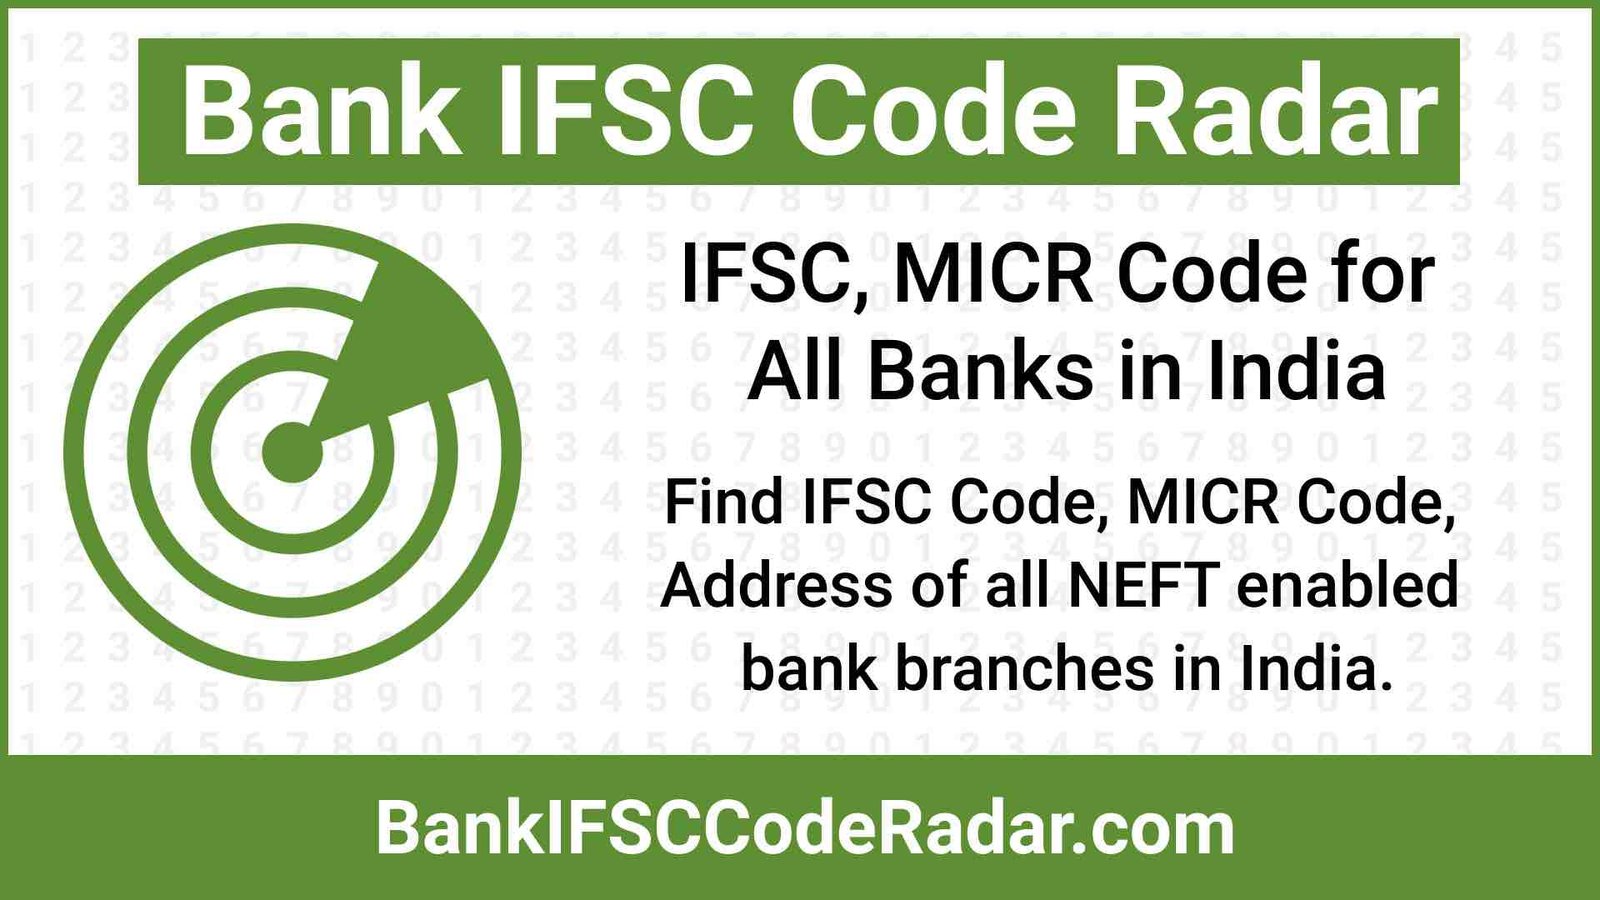 Bank IFSC Code, Bank MICR Code, Bank Address of All Branches in India